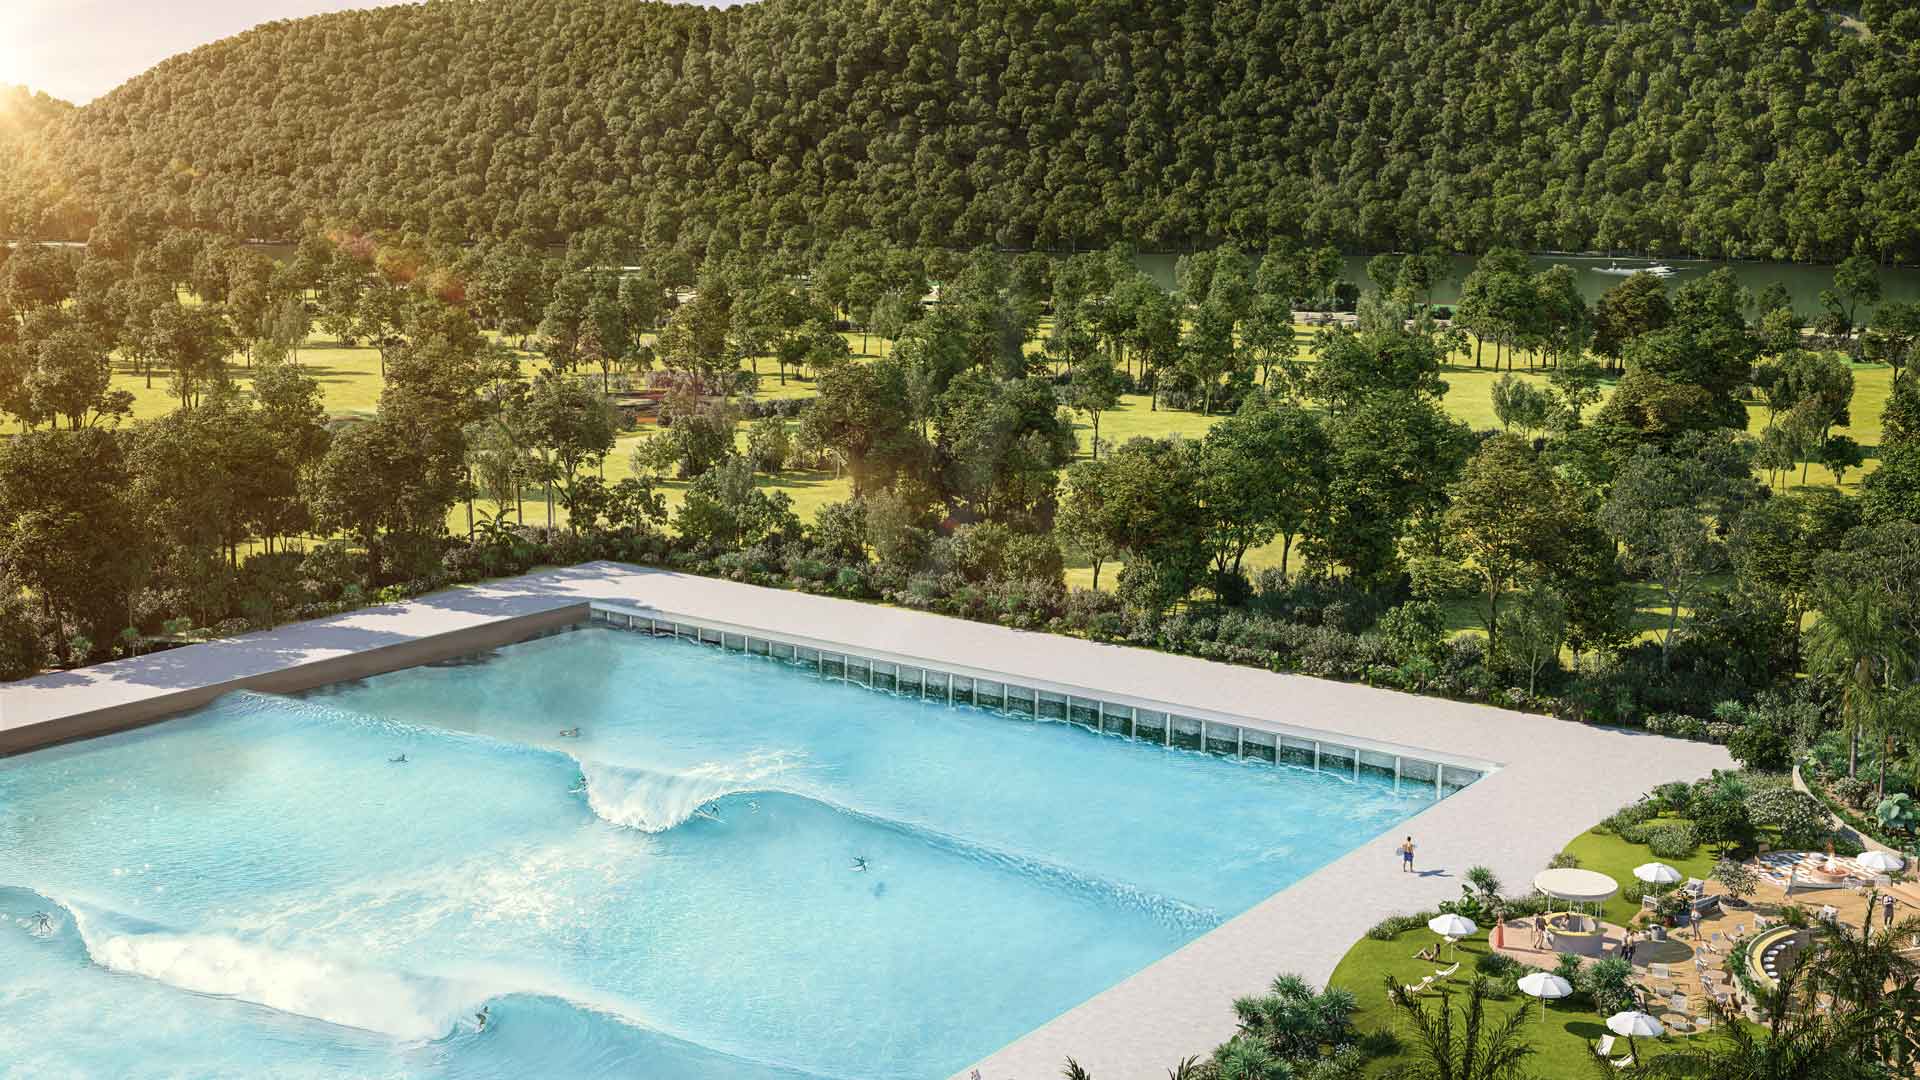 Wisemans Surf Lodge Is the Giant Wave Pool and Luxury Resort Set to Open in Sydney's North